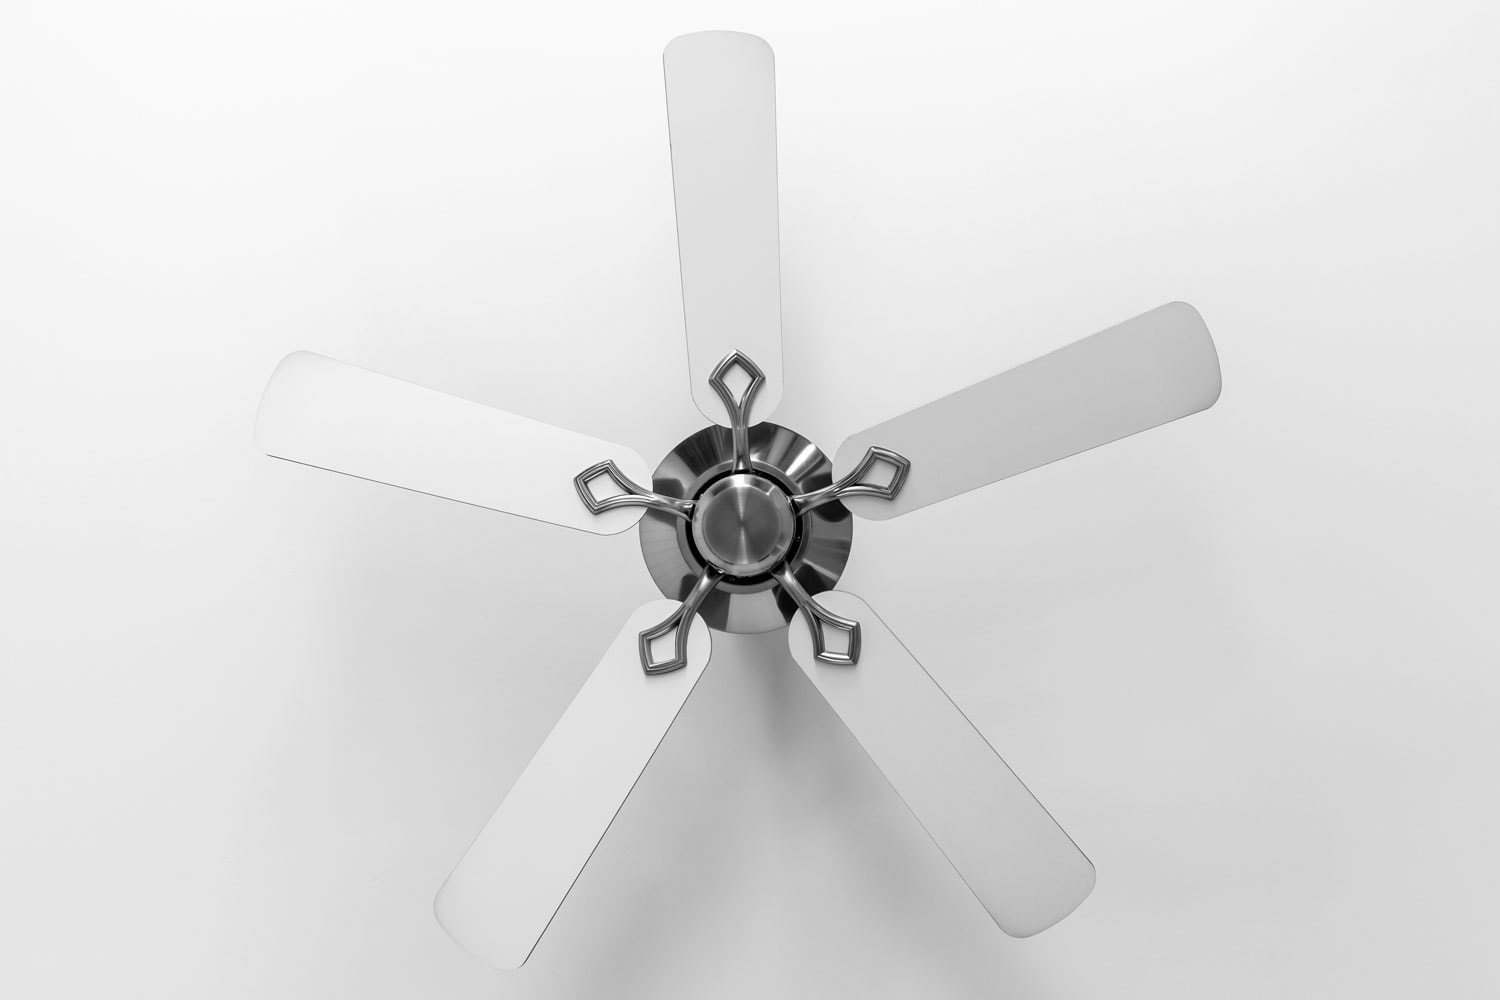 A white metal stainless steel ceiling fan